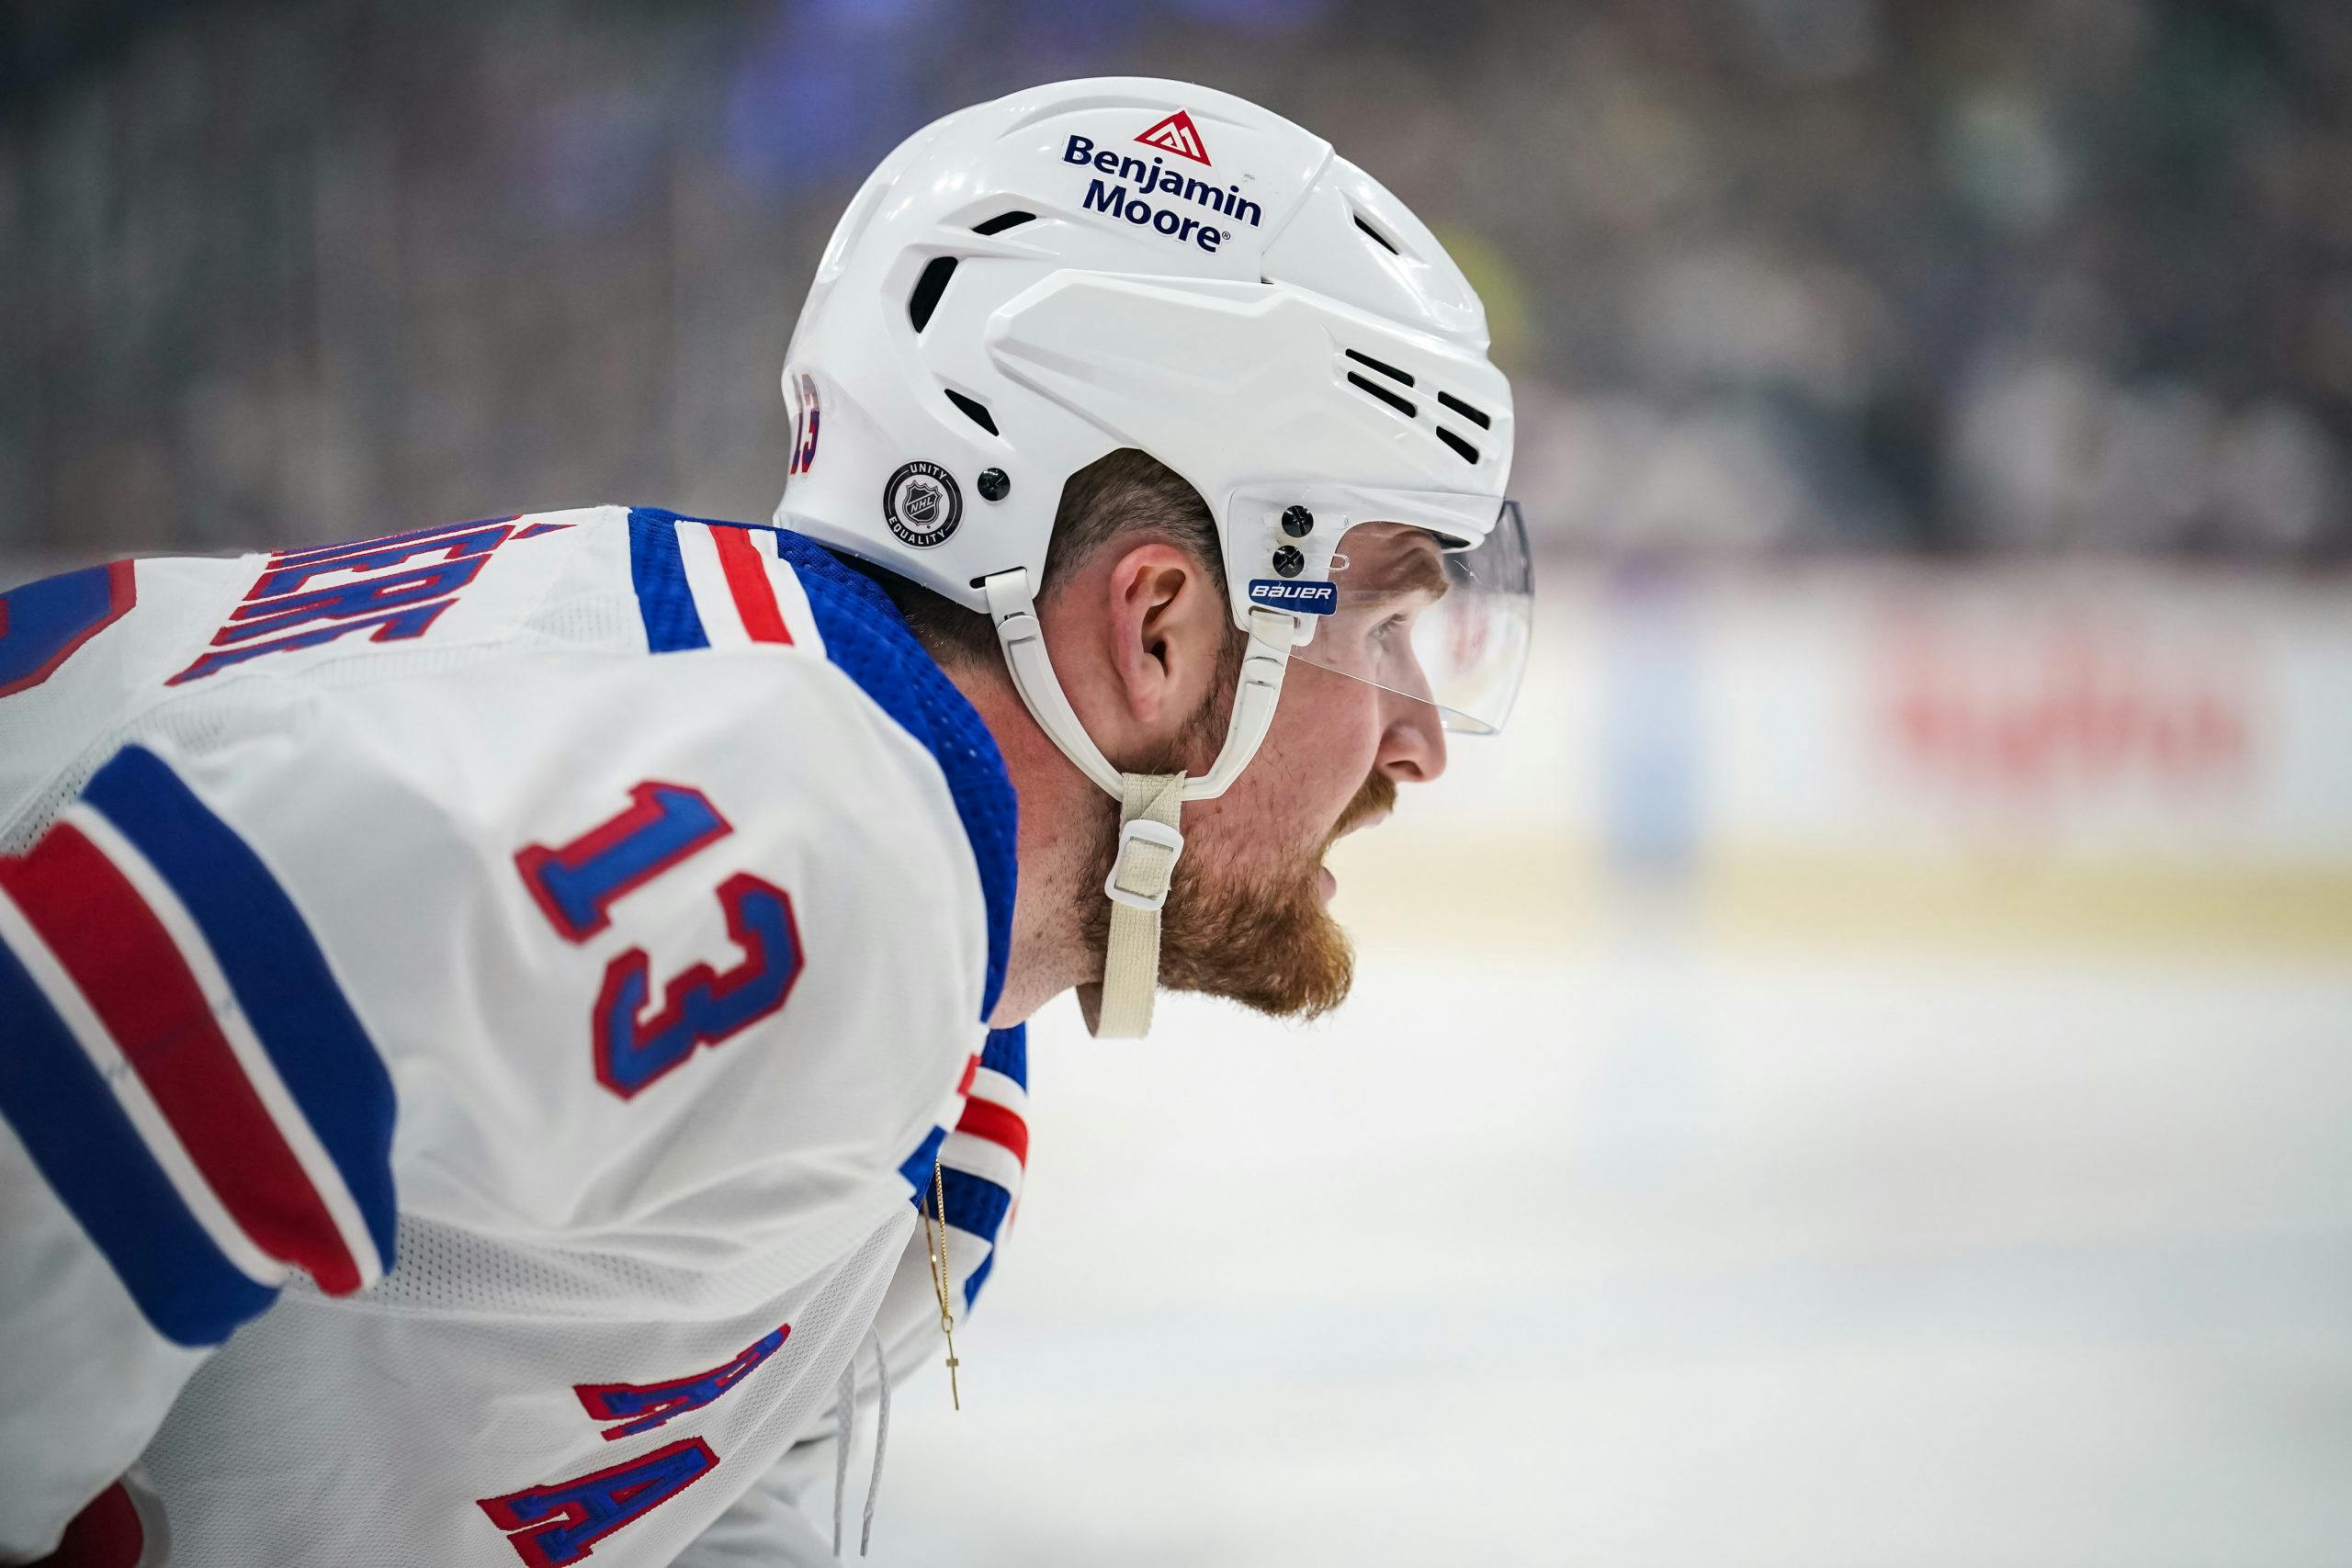 New York Rangers not looking to trade Alexis Lafreniere